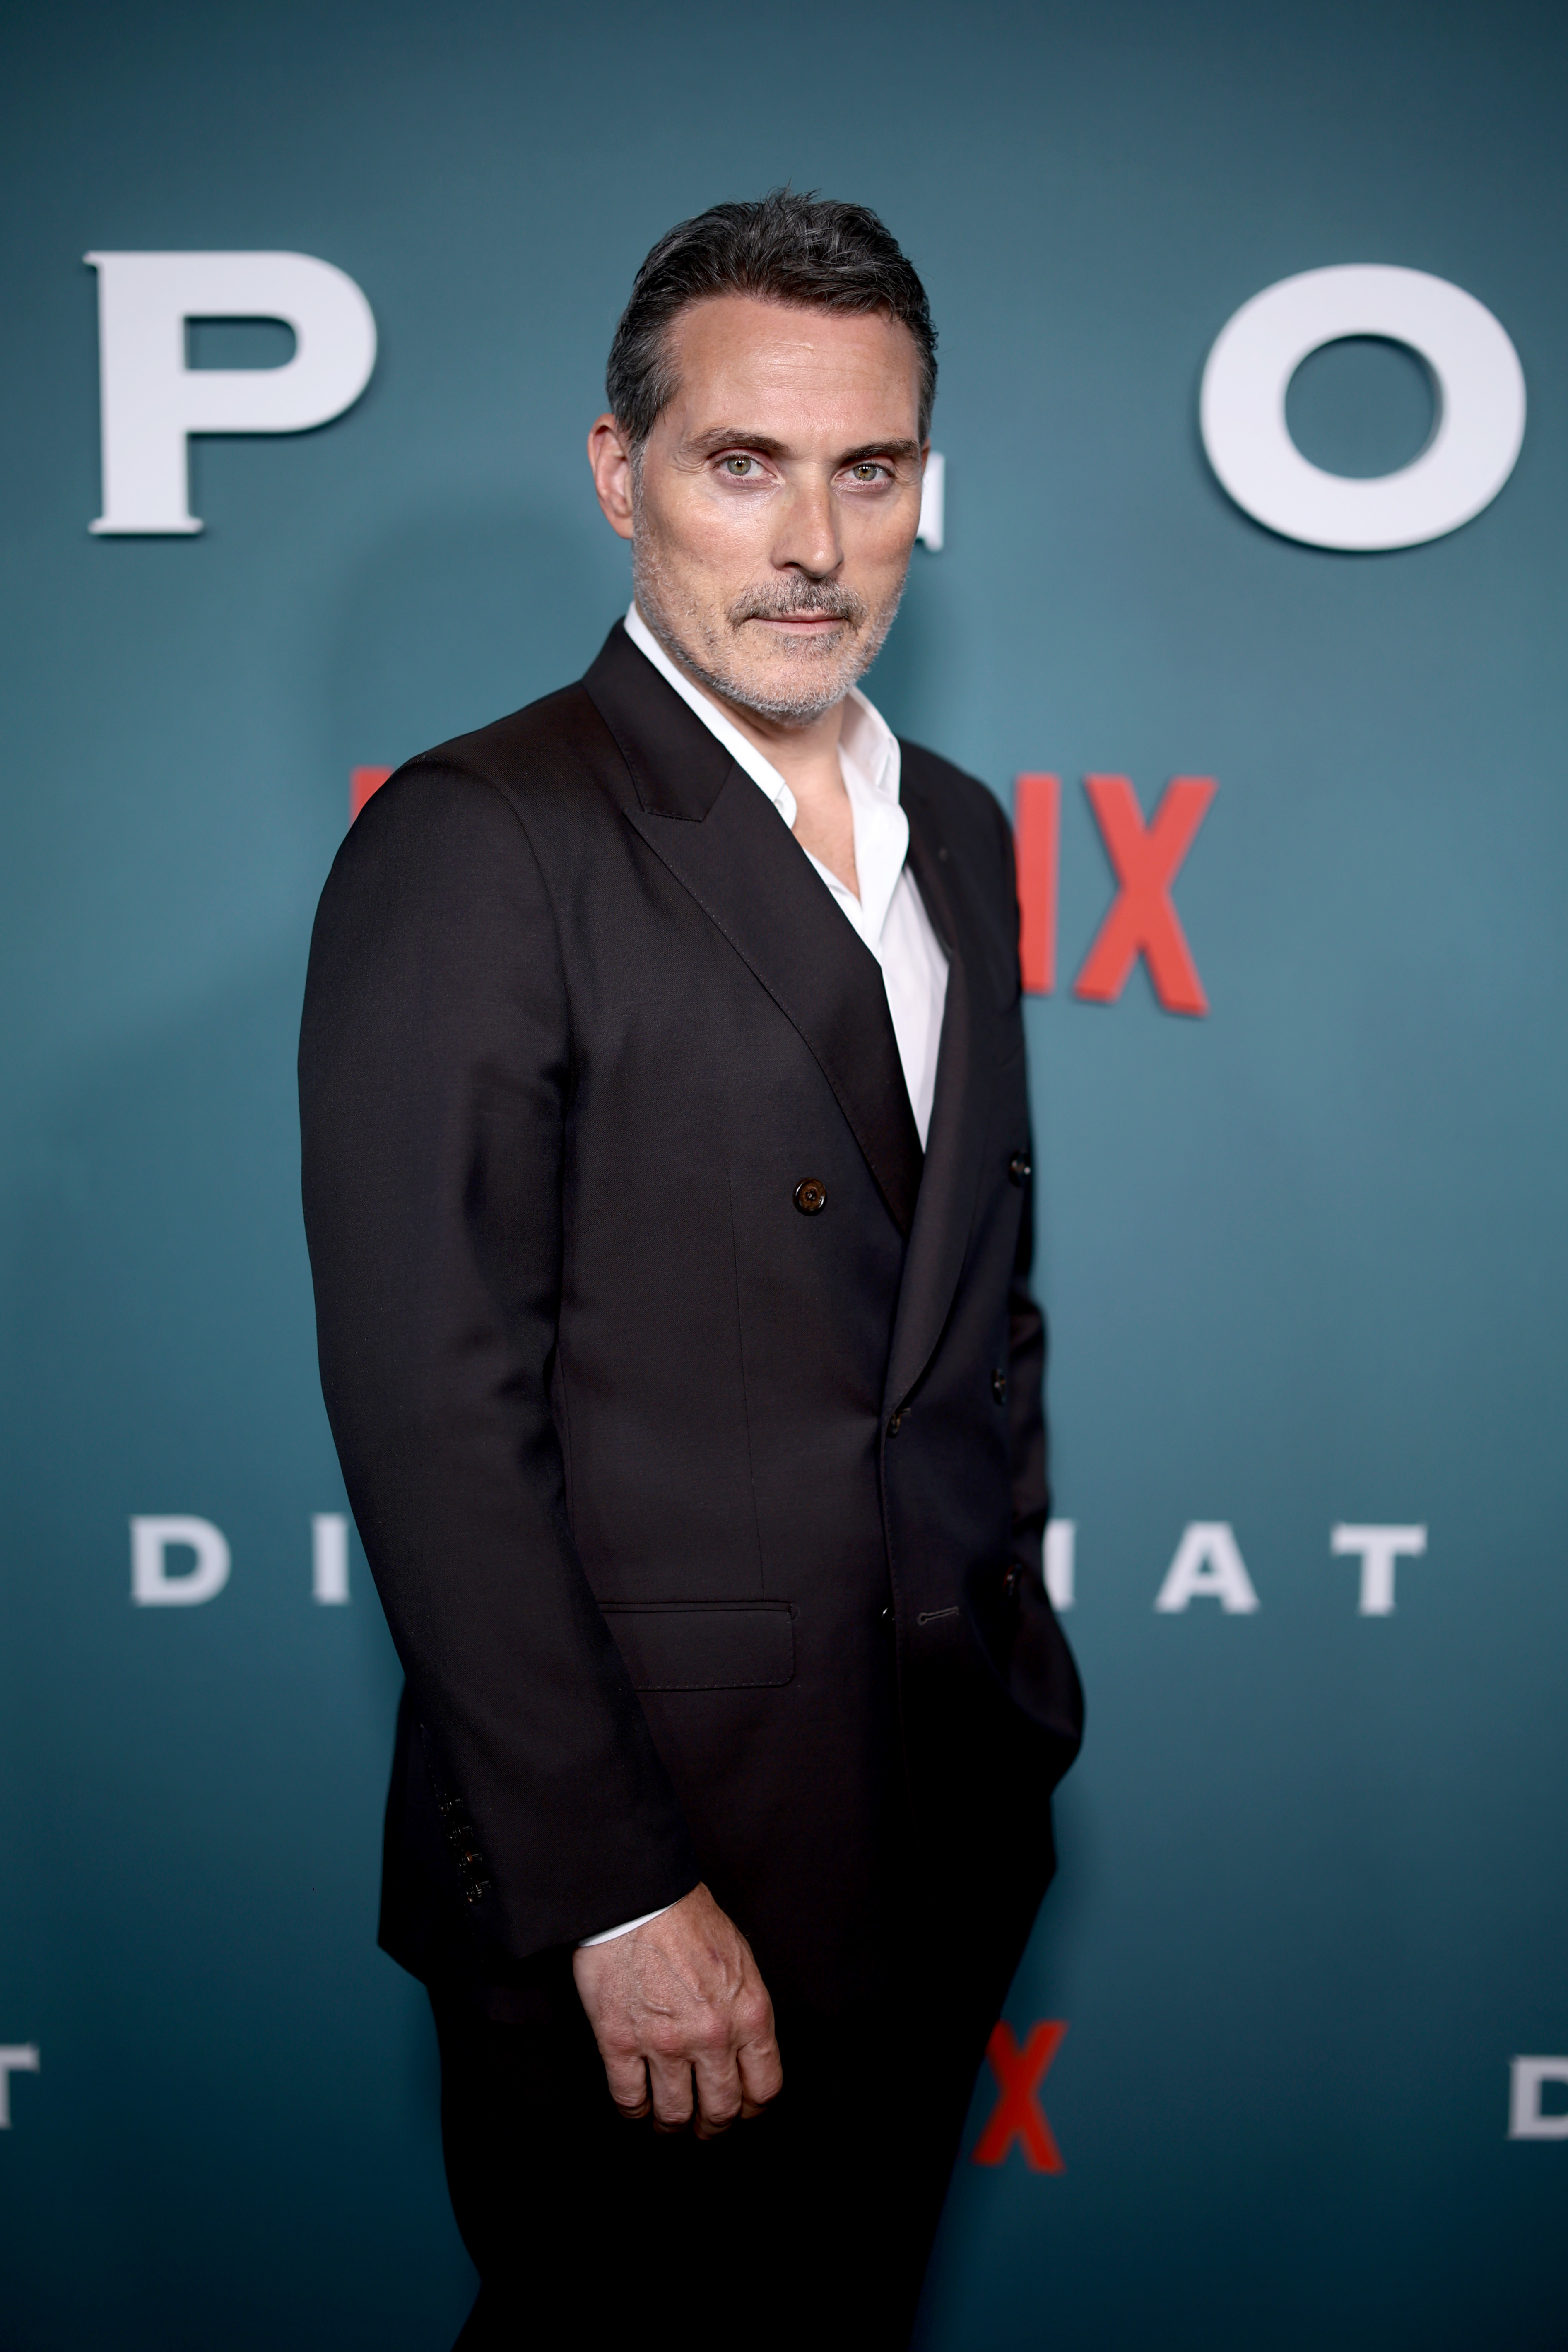 Rufus Sewell at the premiere of "The Diplomat" on April 18, 2023, in New York | Source: Getty Images